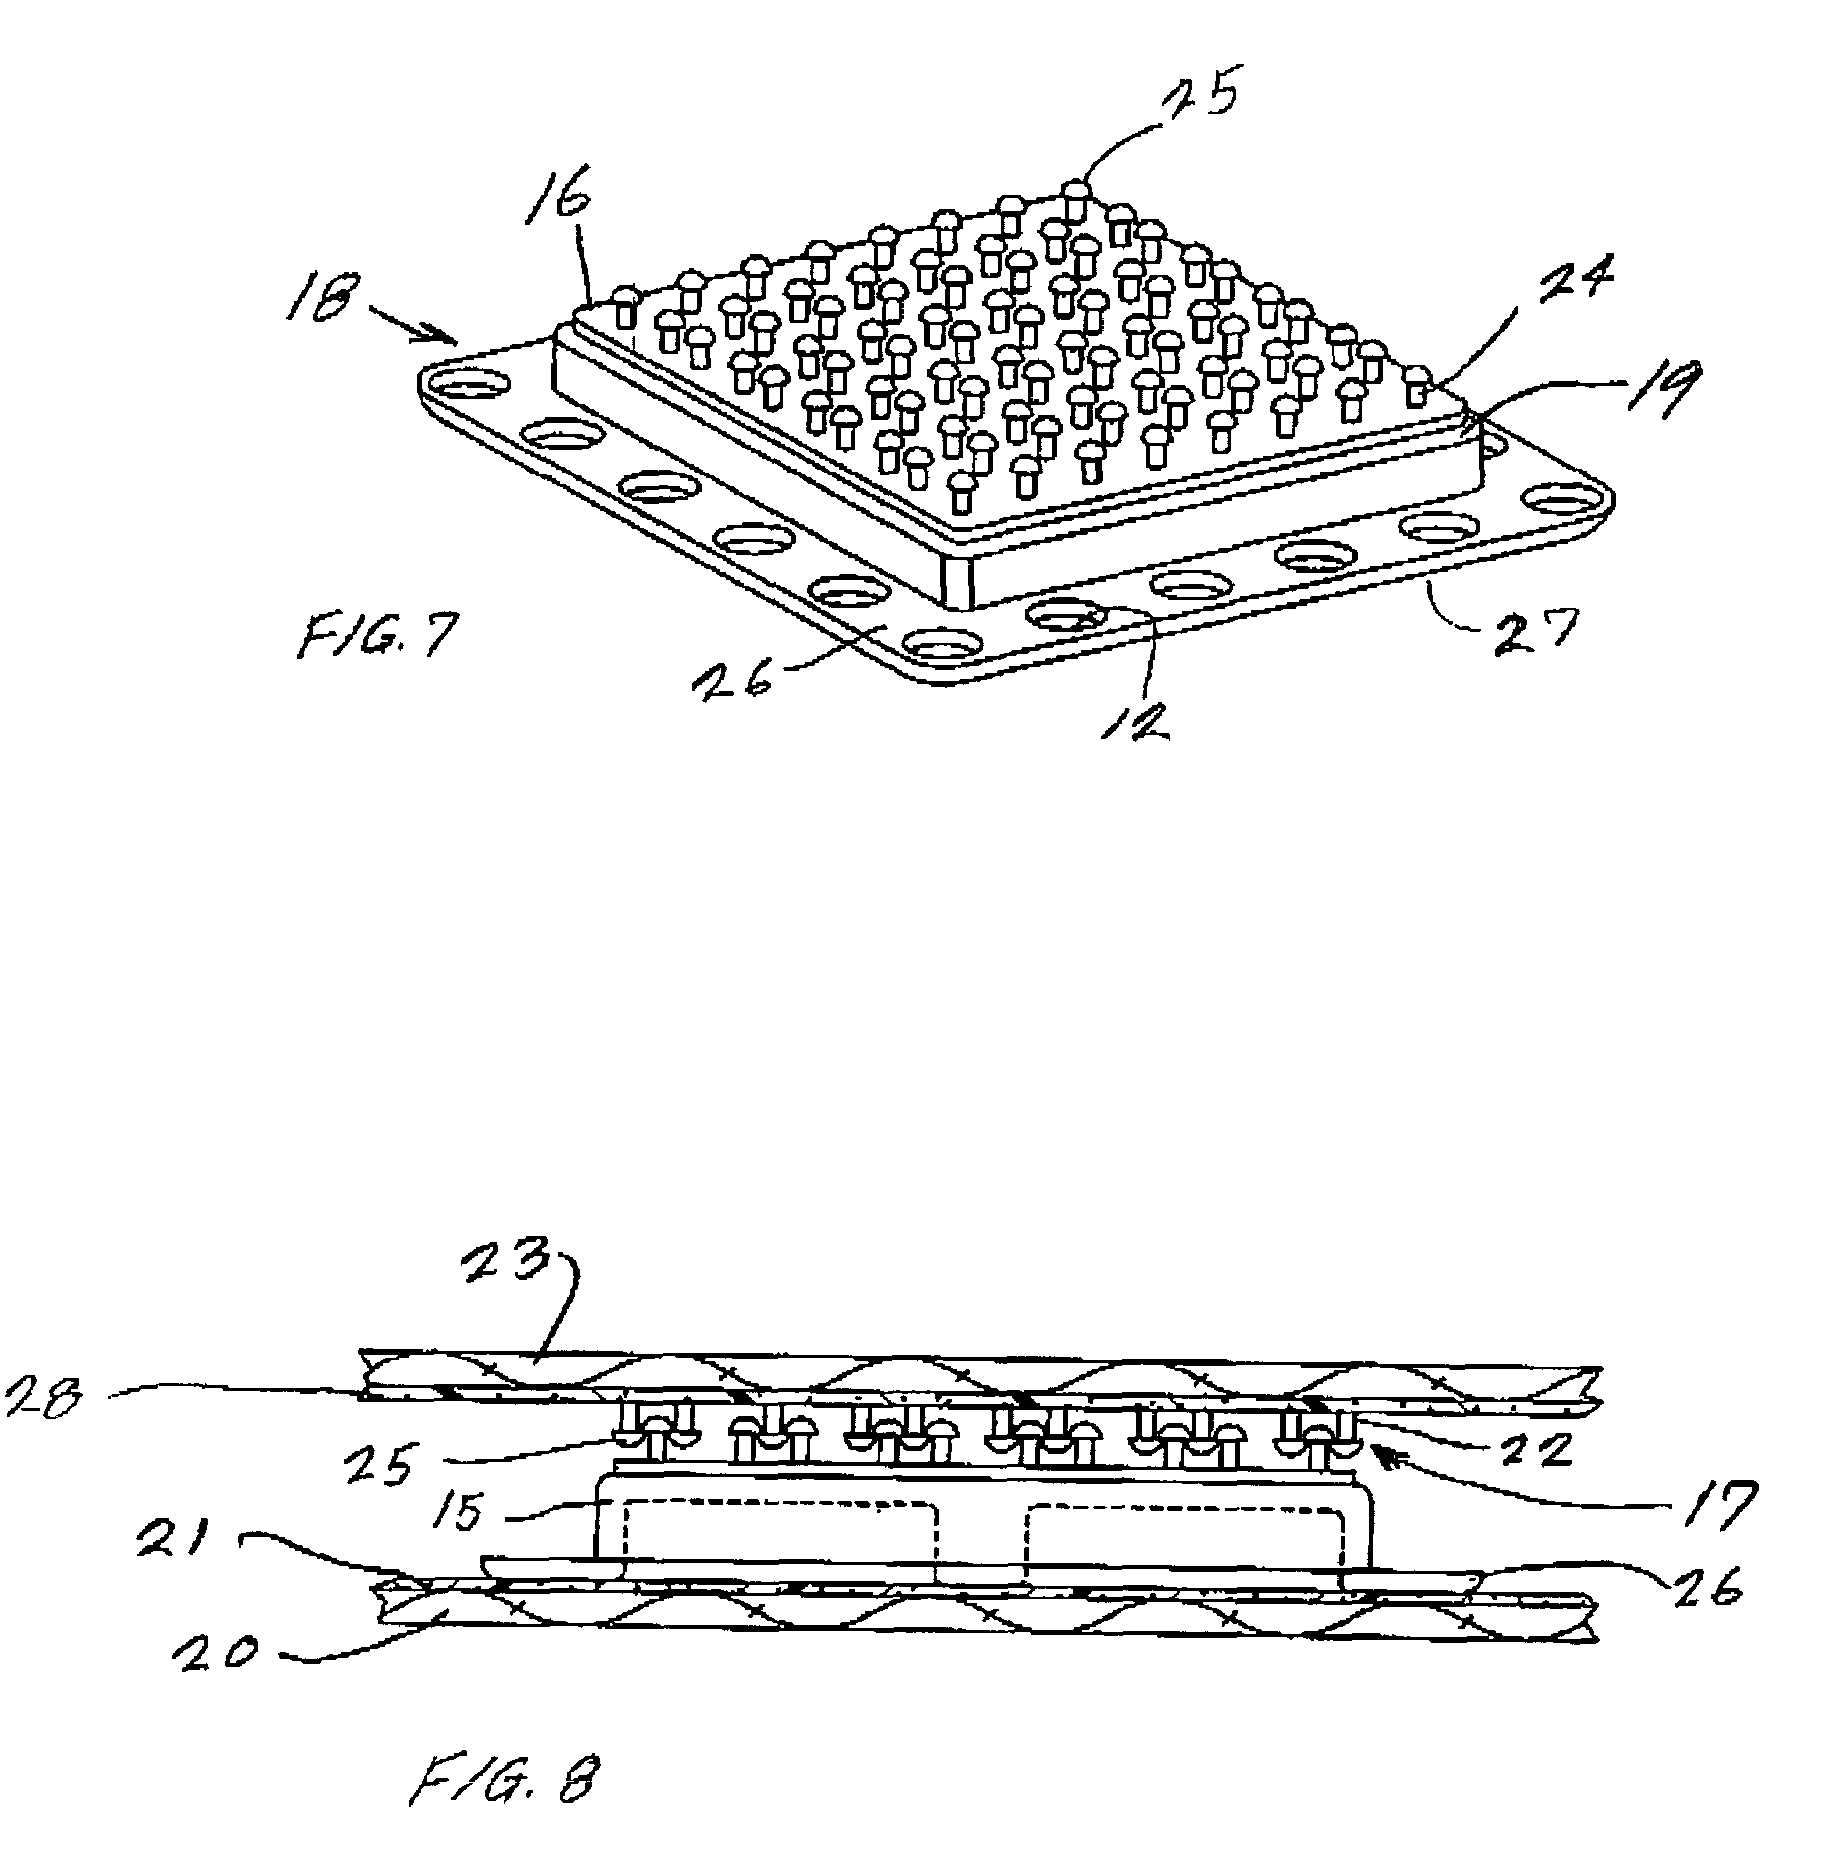 Reclosable fastener riser/spacer, and methods of constructing and utilizing same